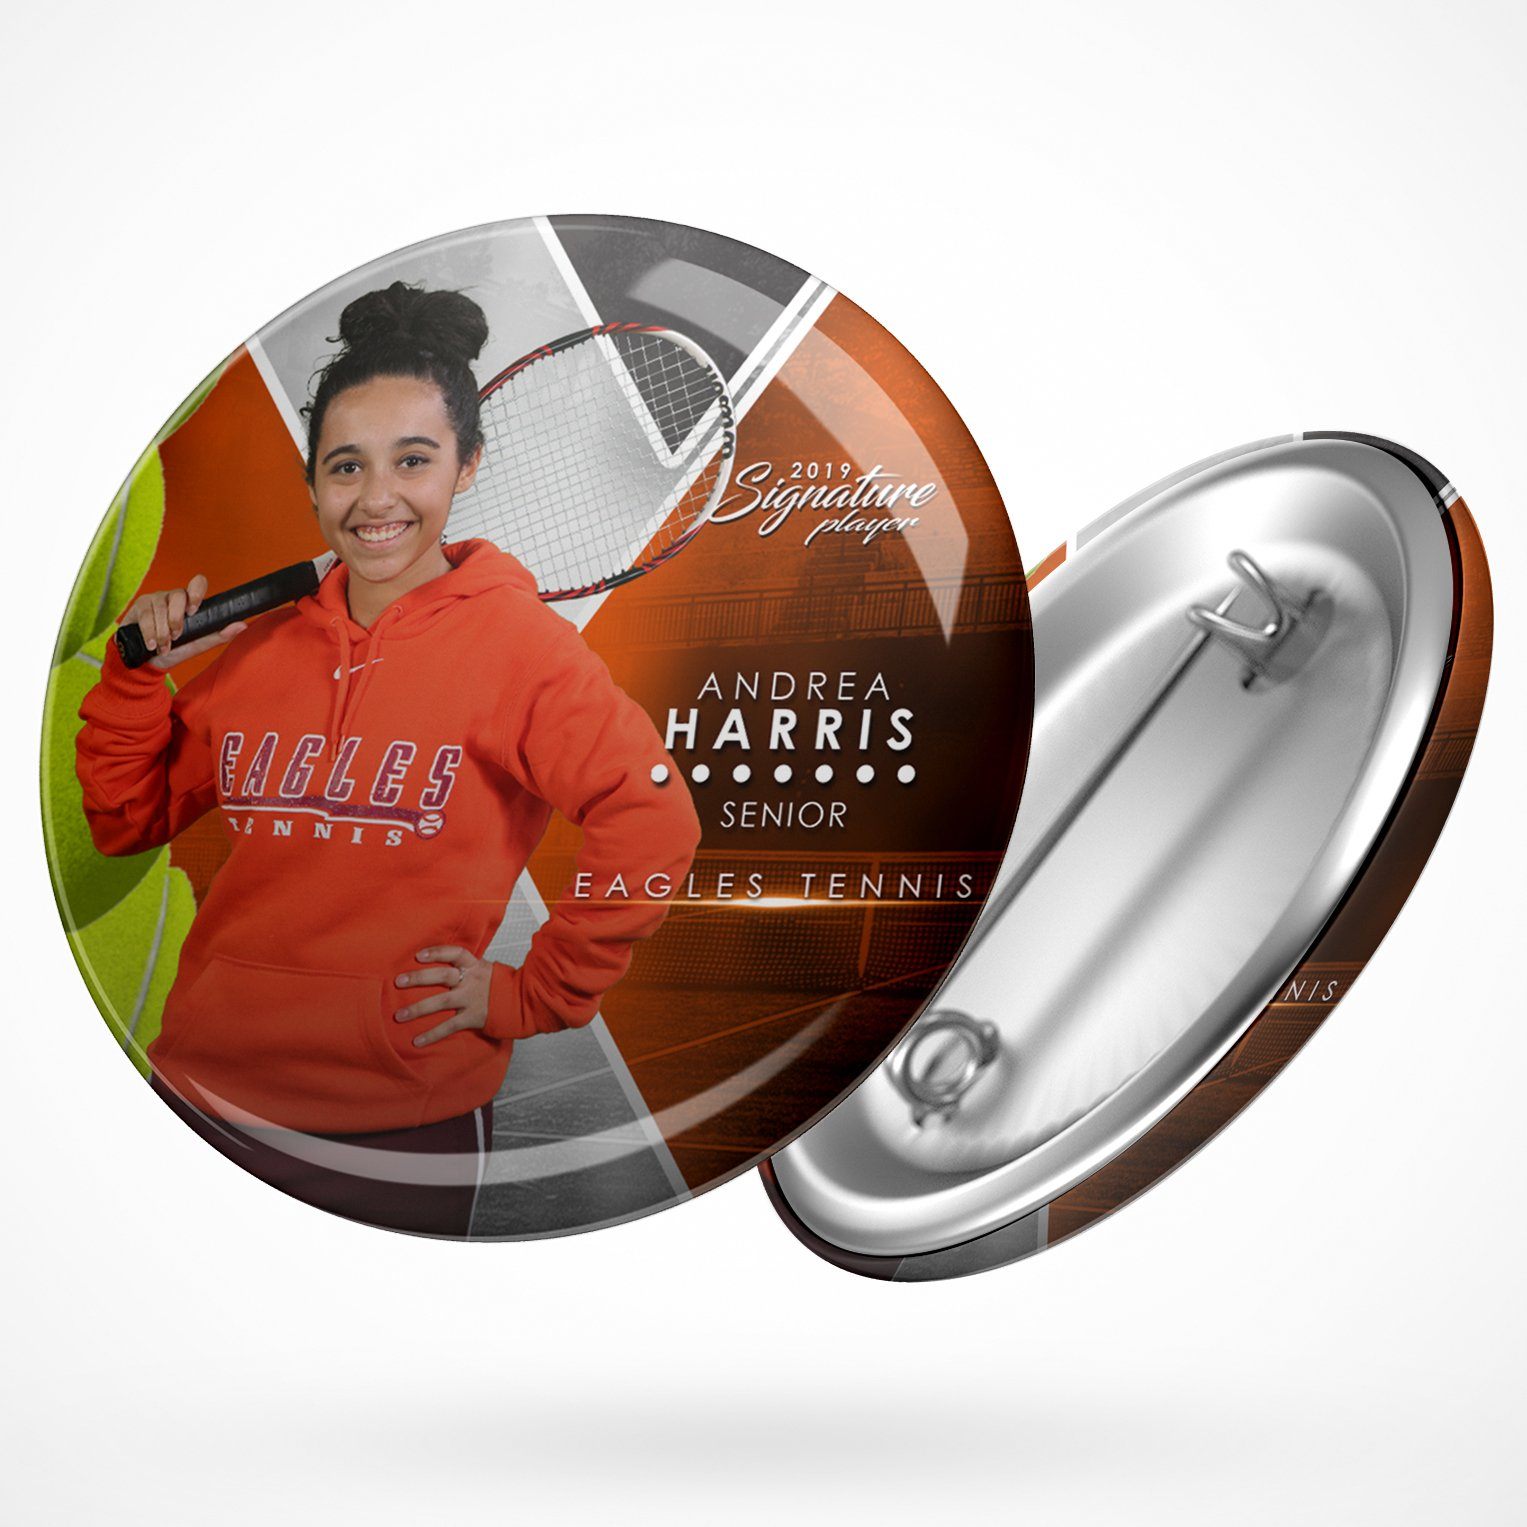 Signature Player - Tennis - V2 - Extraction Button Template-Photoshop Template - Photo Solutions